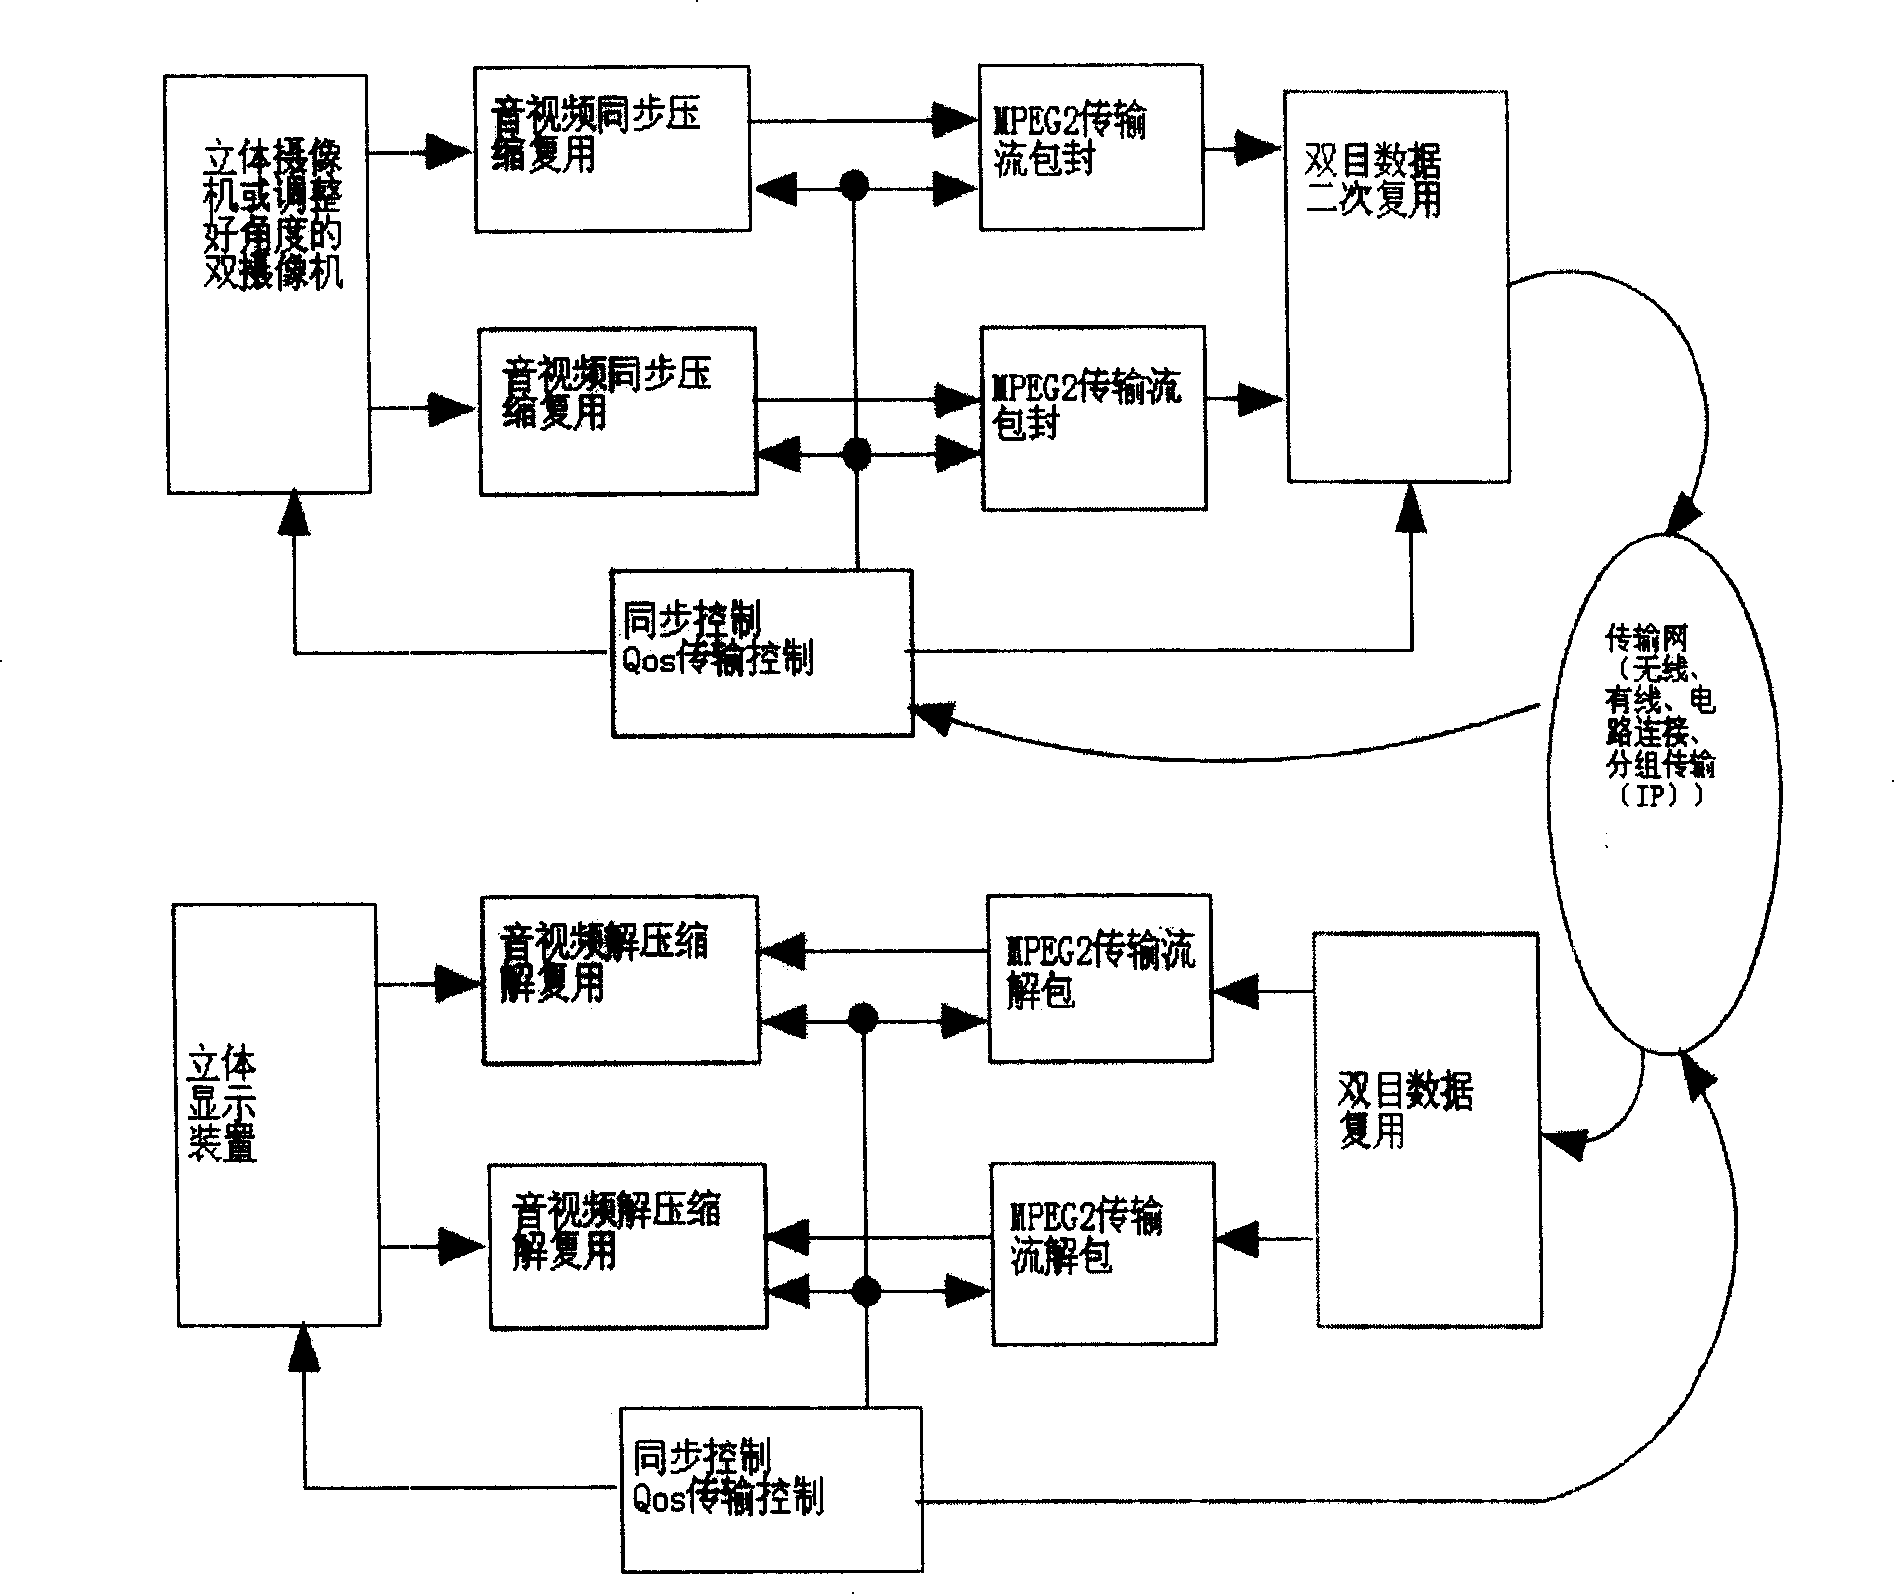 System and method for transmitting stereo audio and video numerical coding based on transmission stream